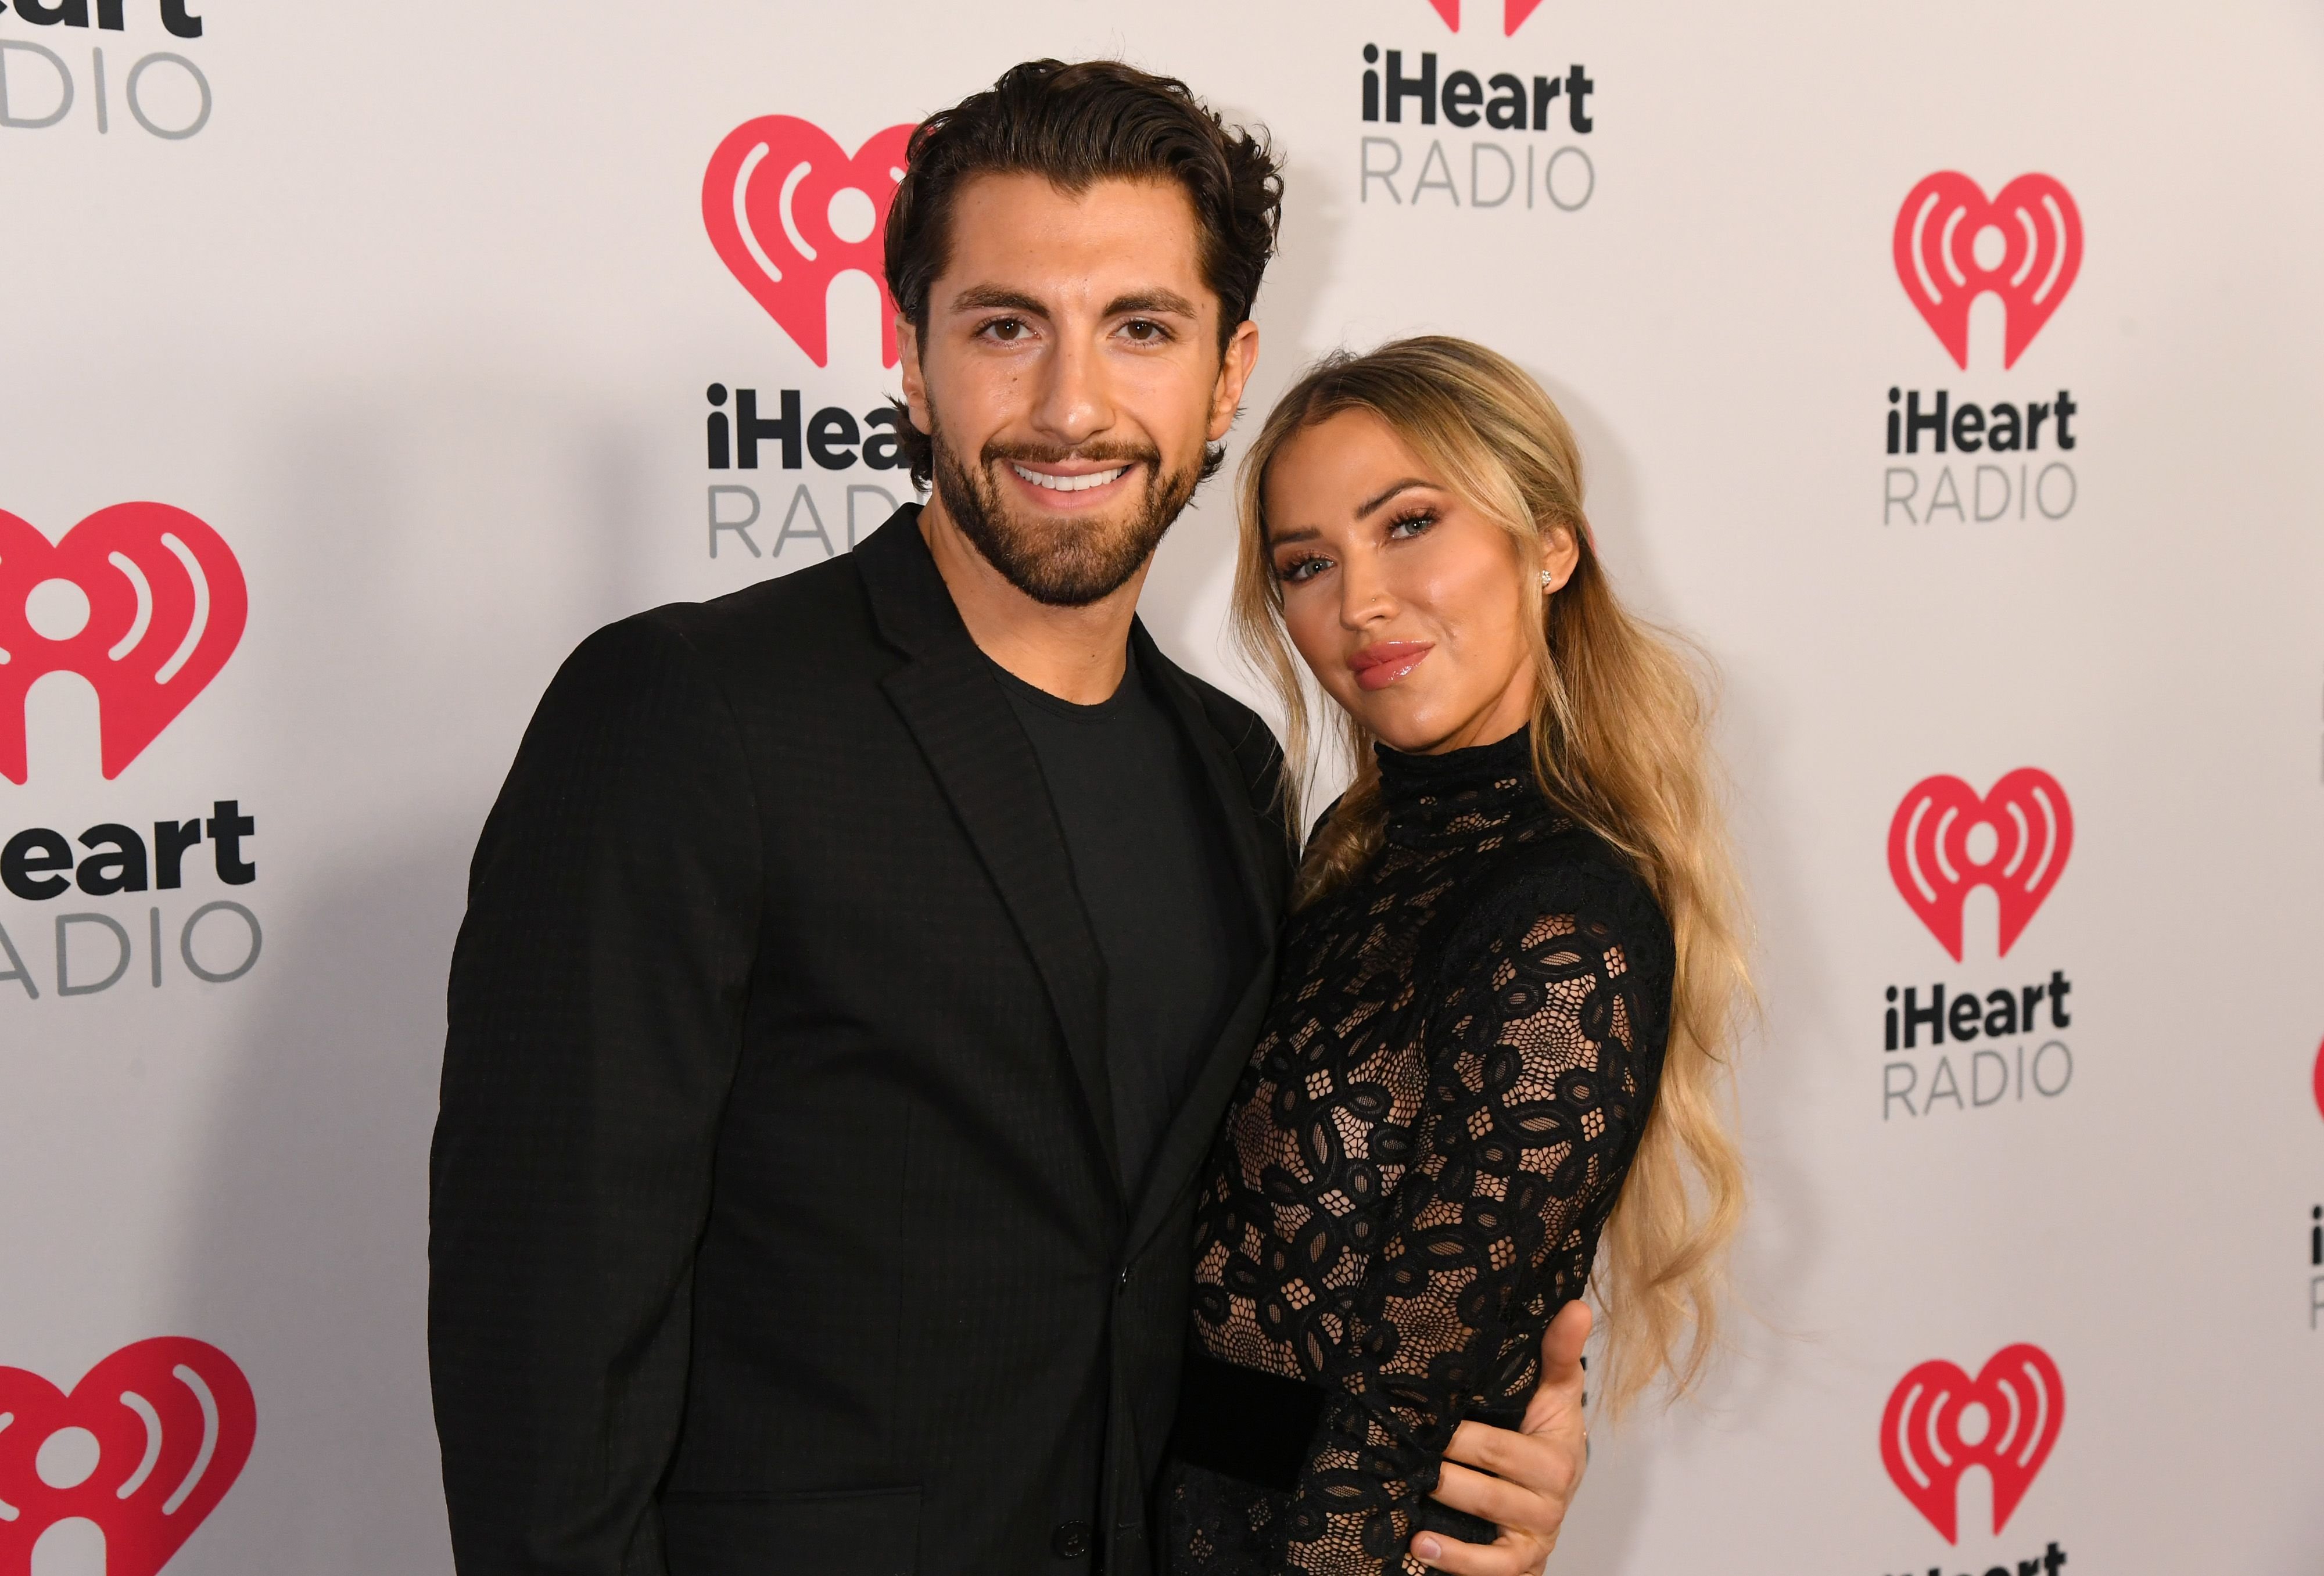 Jason Tartick and Kaitlyn Bristowe during the 2020 iHeartRadio Podcast Awards at the iHeartRadio Theater on January 17, 2020 in Burbank, California. | Source: Getty Images